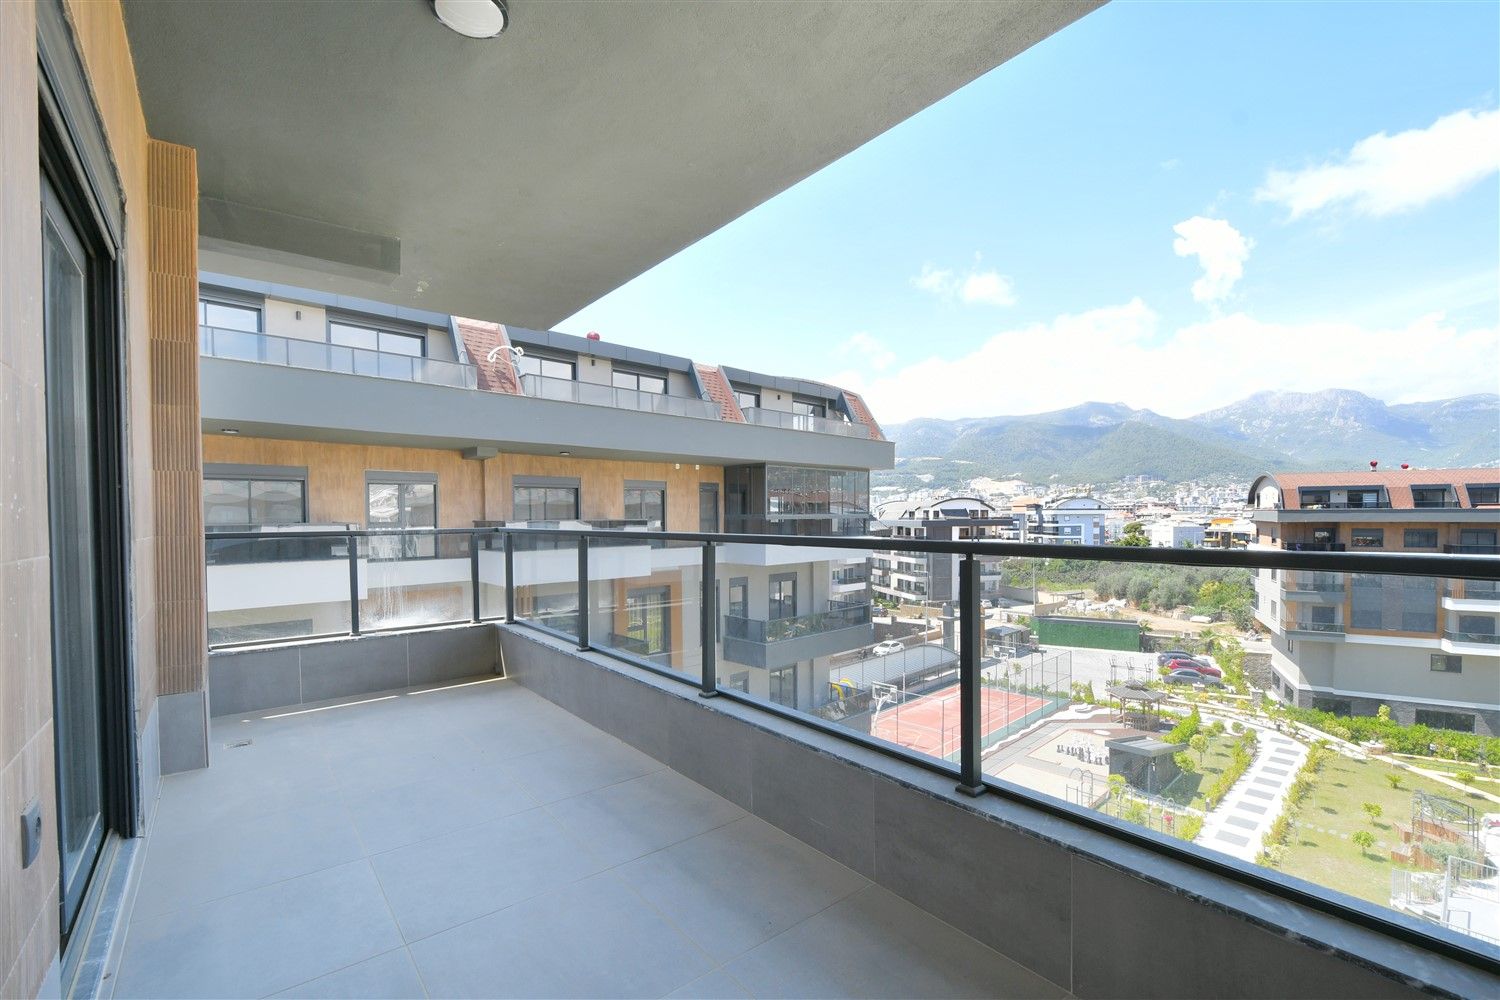 New 3 bedroom penthouse in complex with full activity